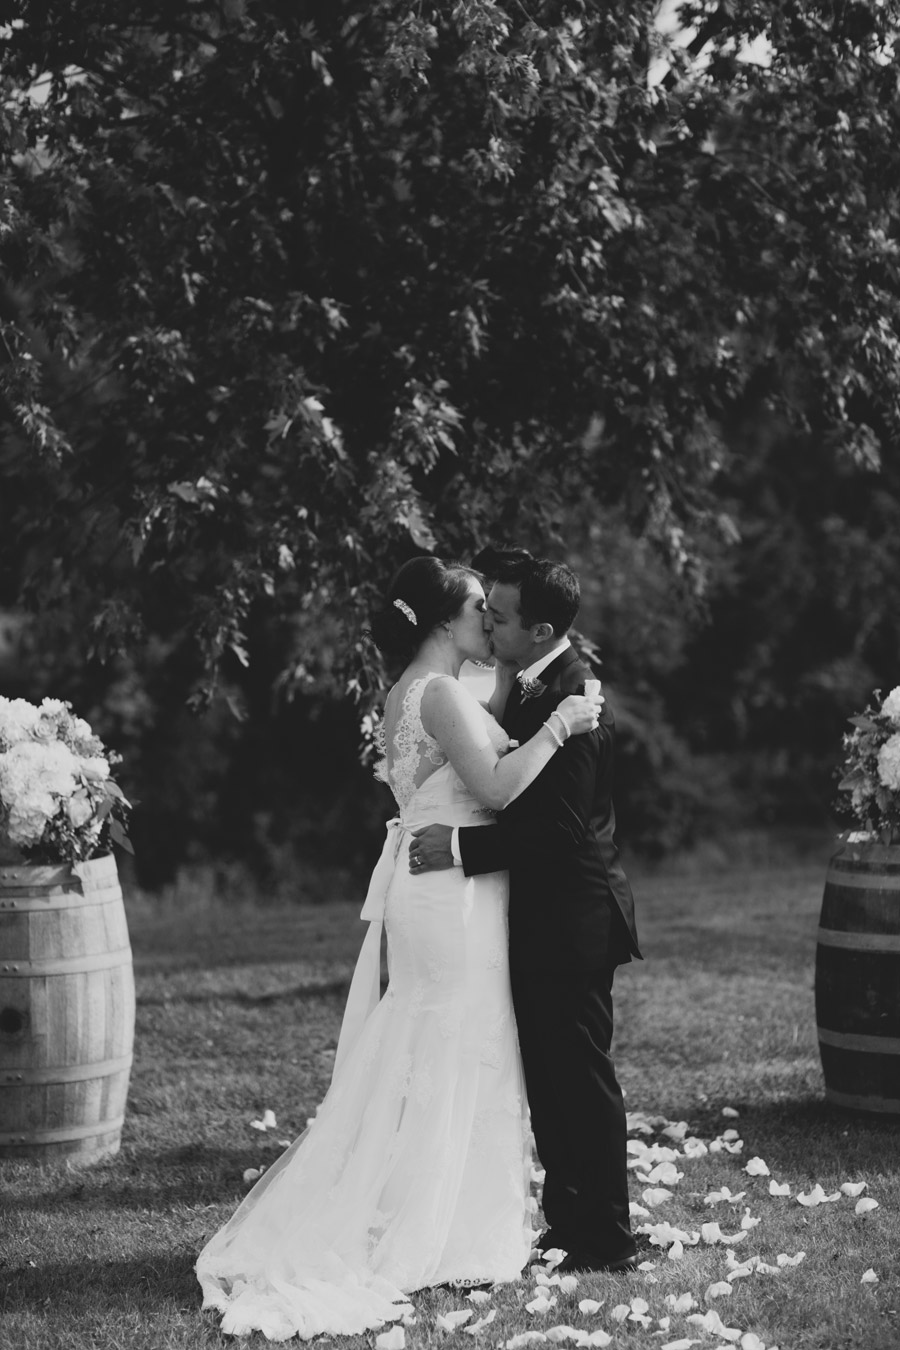 Getting married at a winery